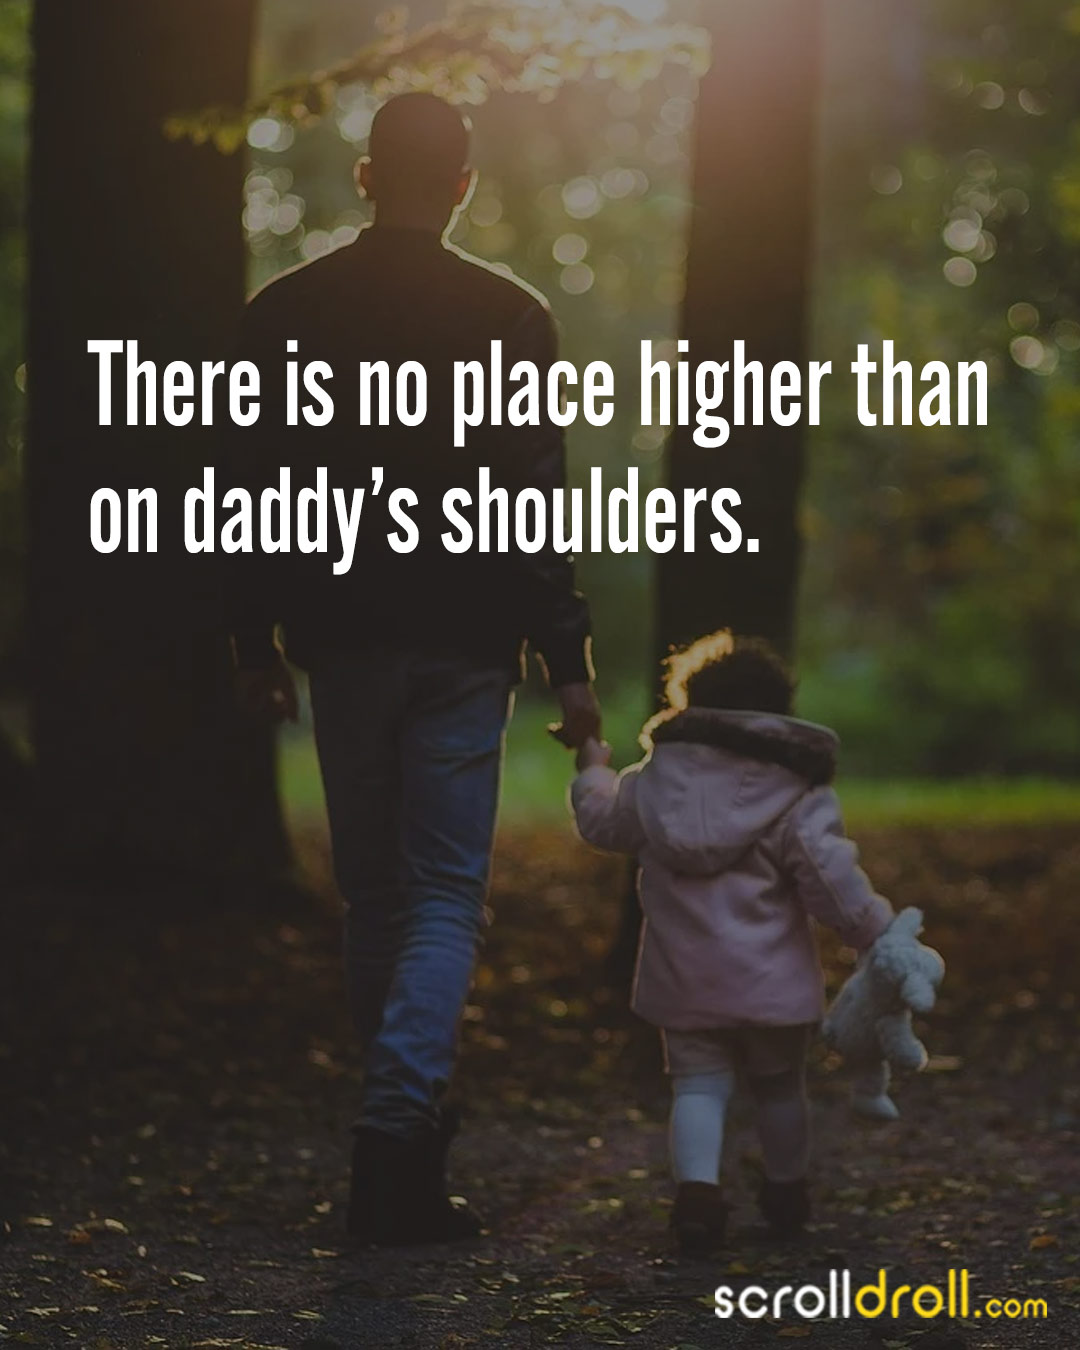 Top 999 Father Daughter Images With Quotes Amazing Collection Father Daughter Images With